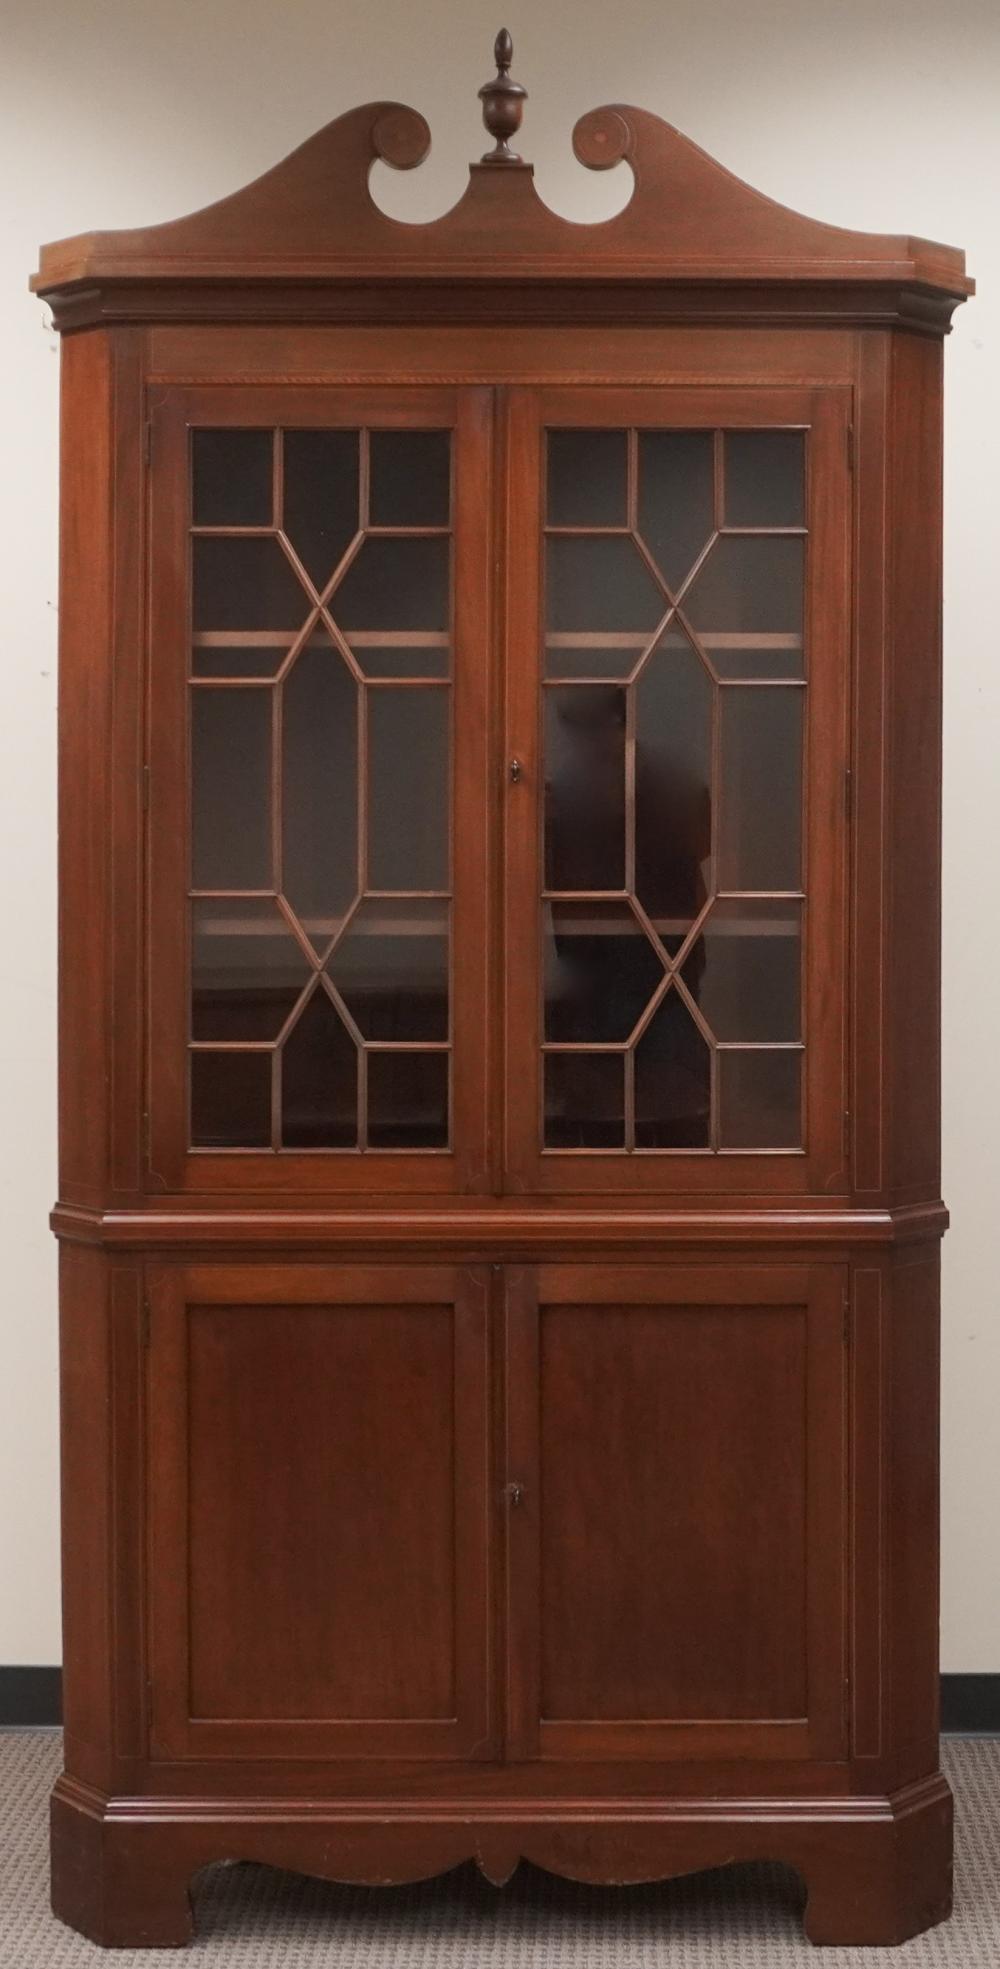 FEDERAL STYLE SATINWOOD INLAID 2e569a